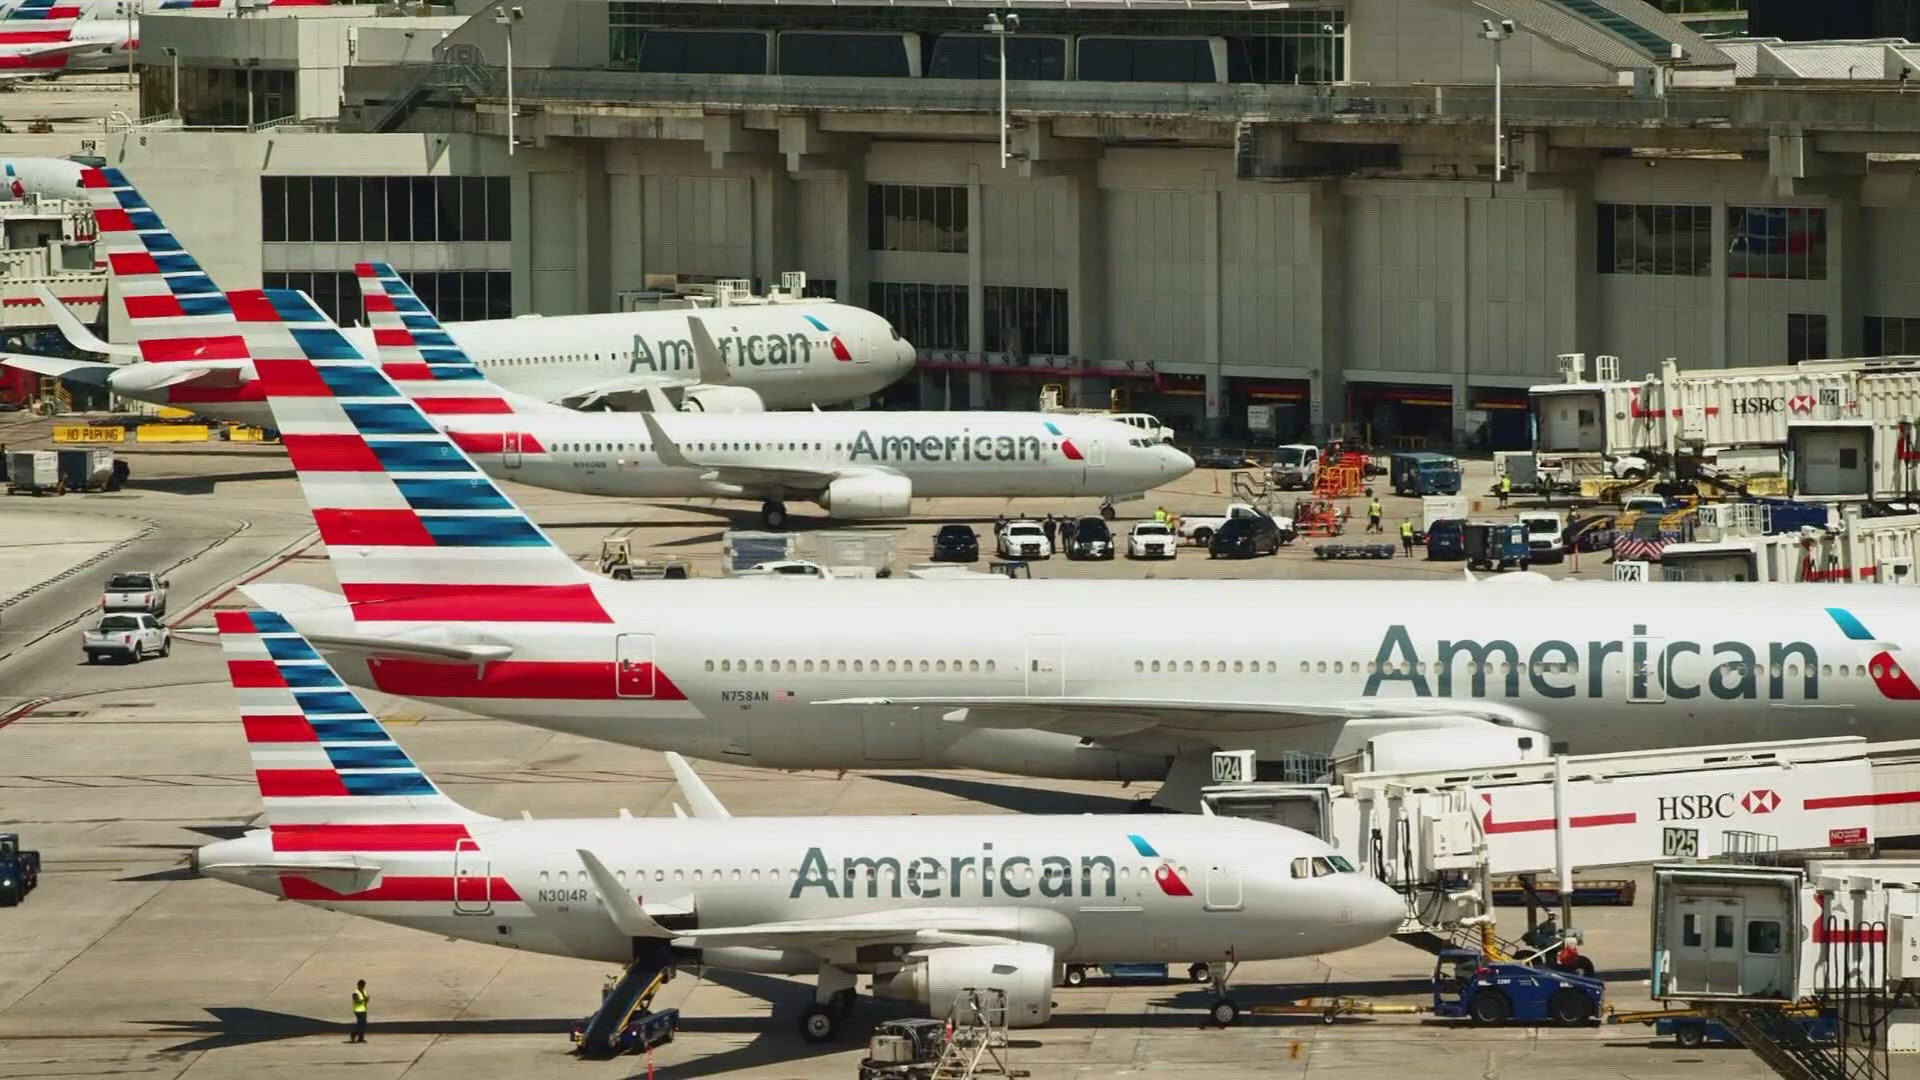 Fort Worth-based American Airlines will begin offering service to Tulum from Dallas-Fort Worth International Airport Thursday.